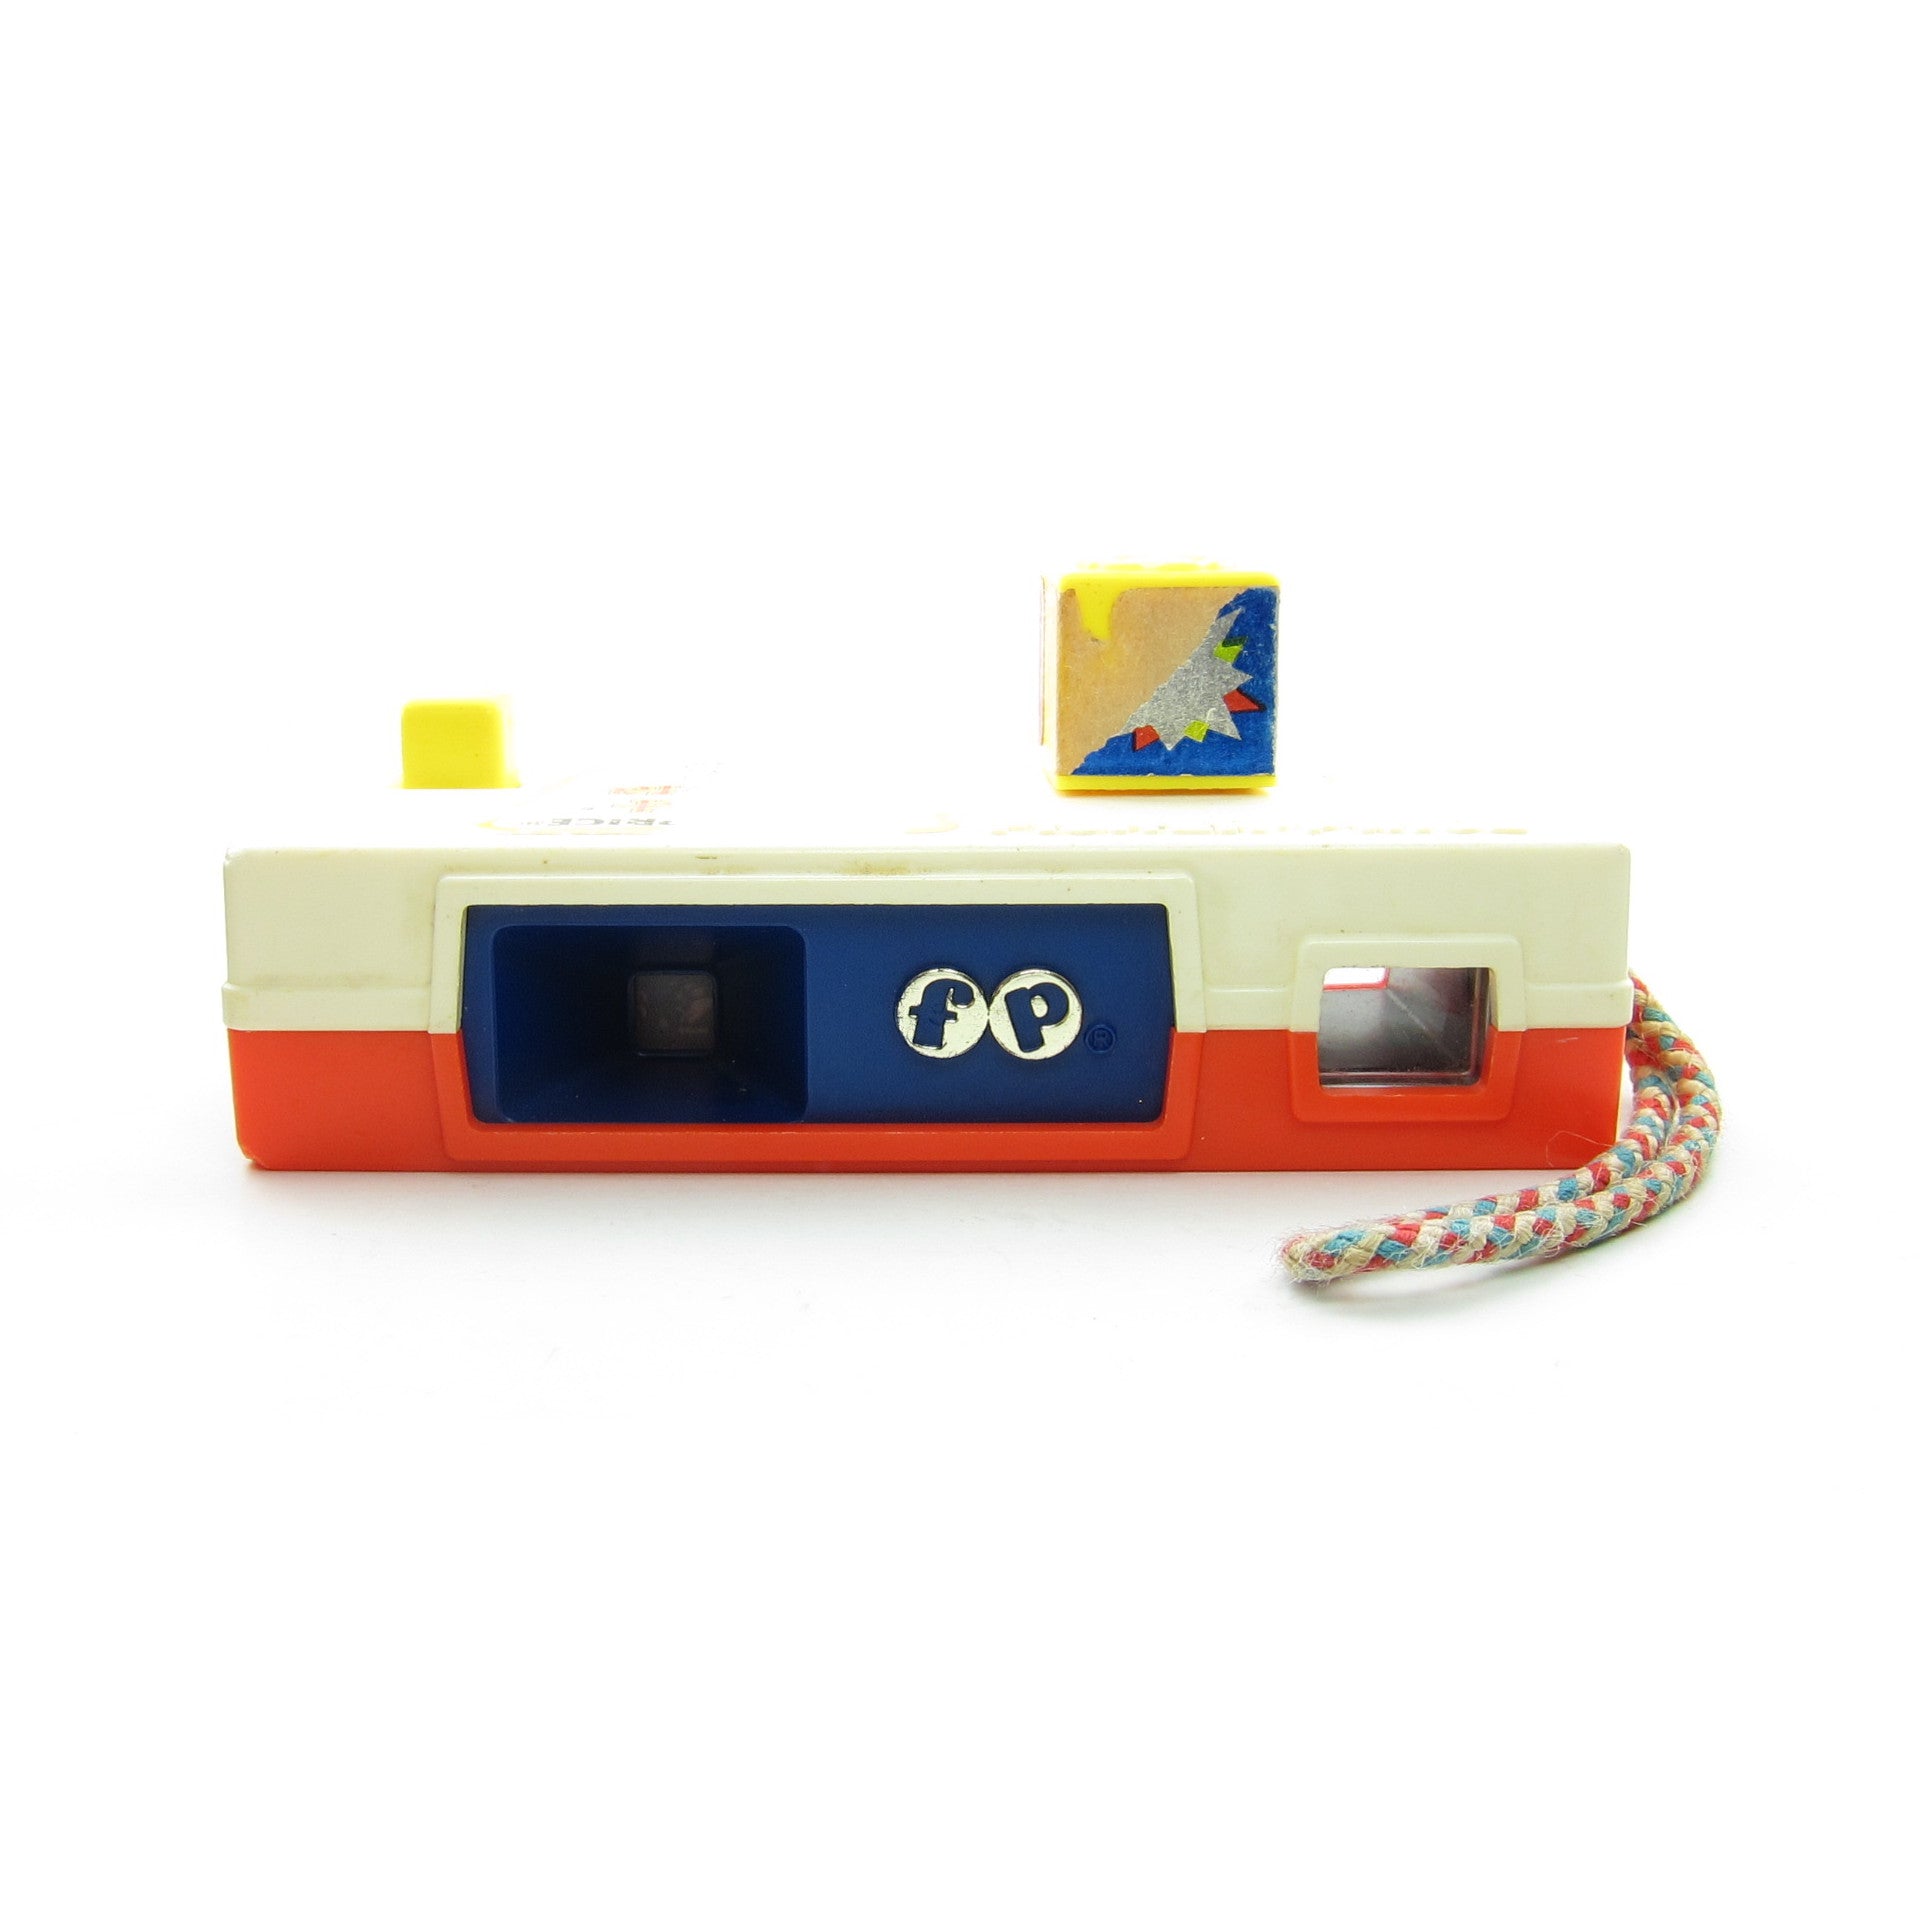 Fisher-Price vintage 1973 Pocket Camera with zoo pictures